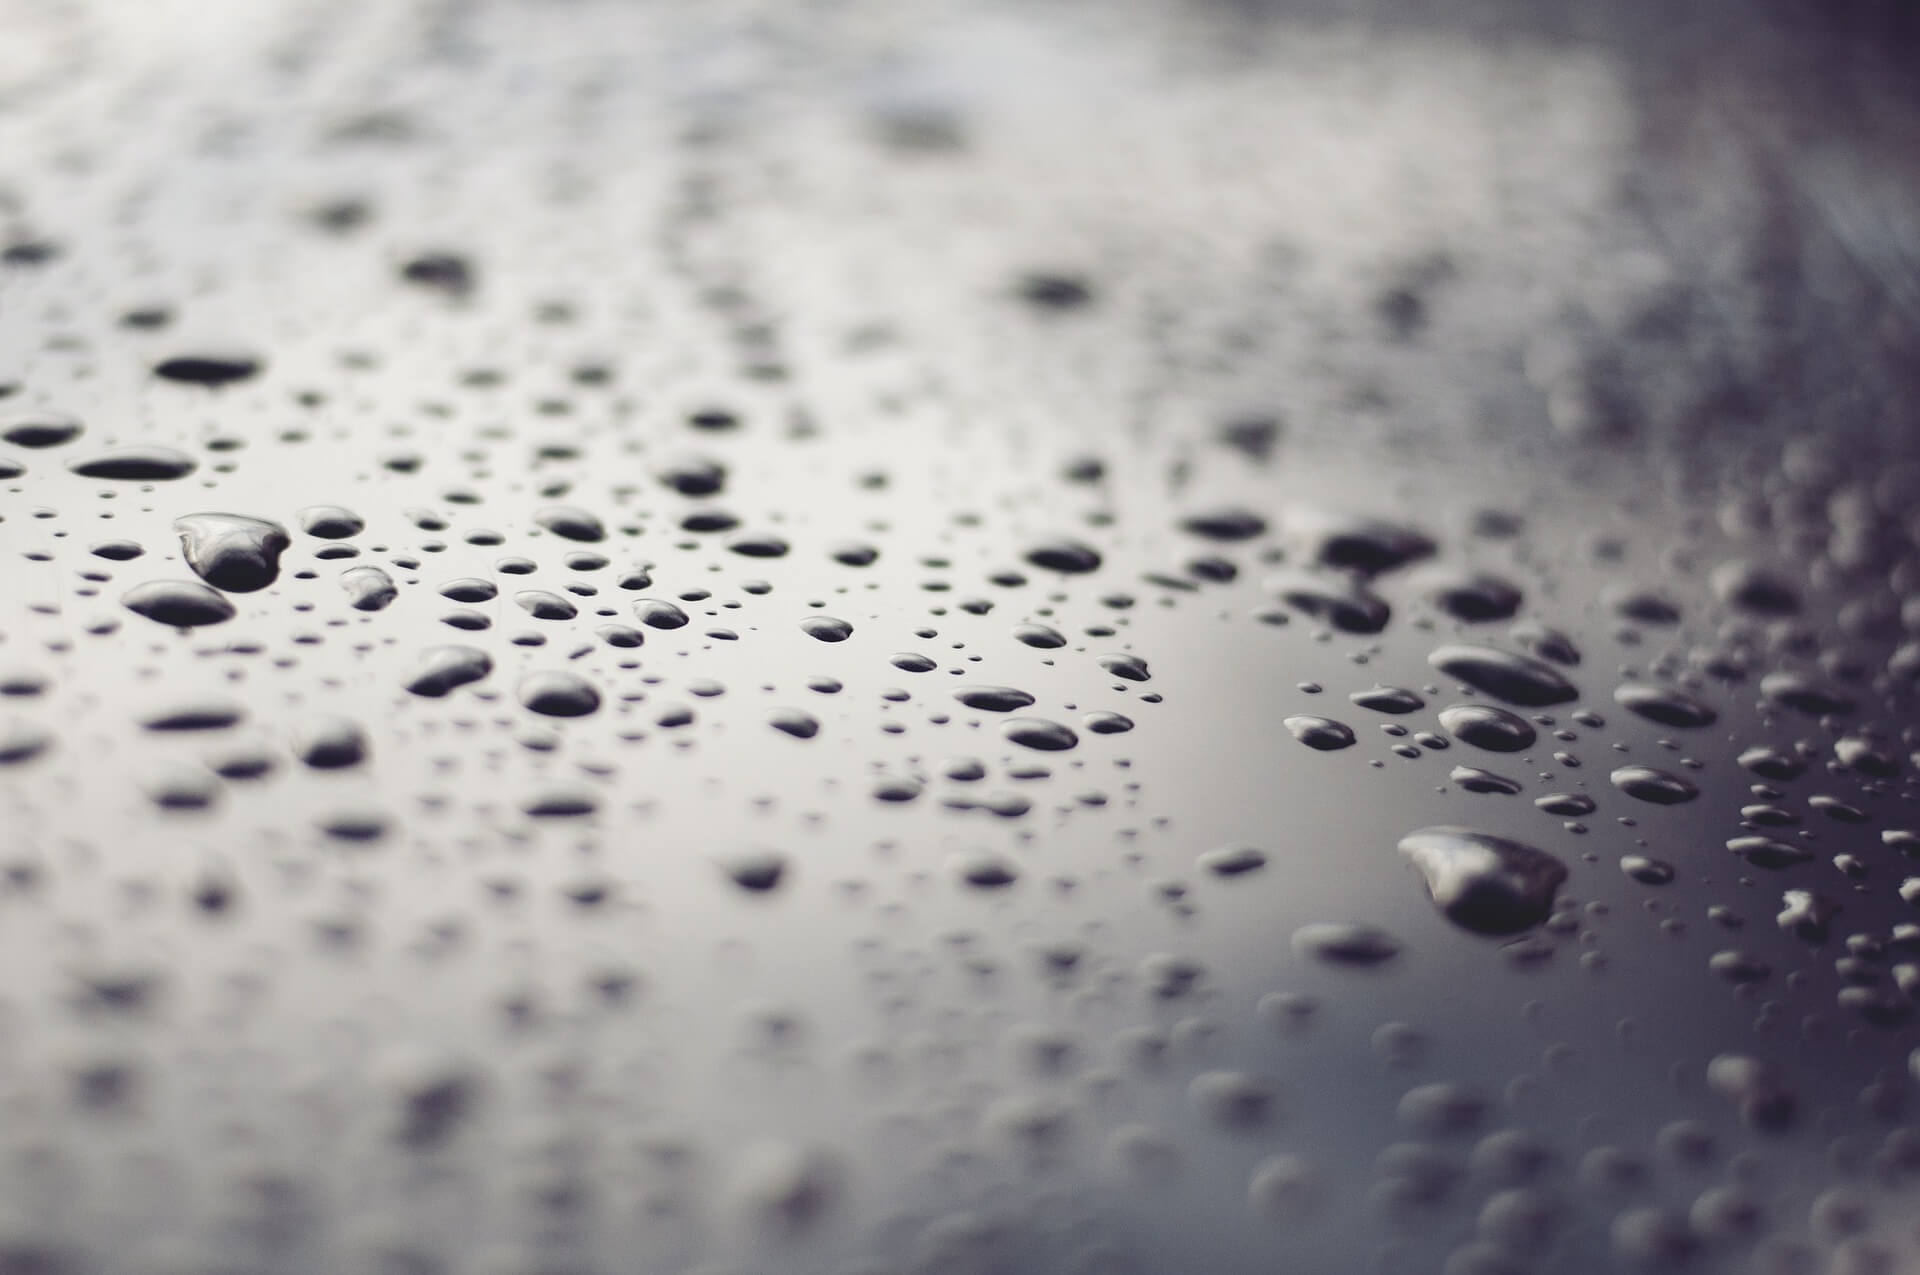 water droplets on surface